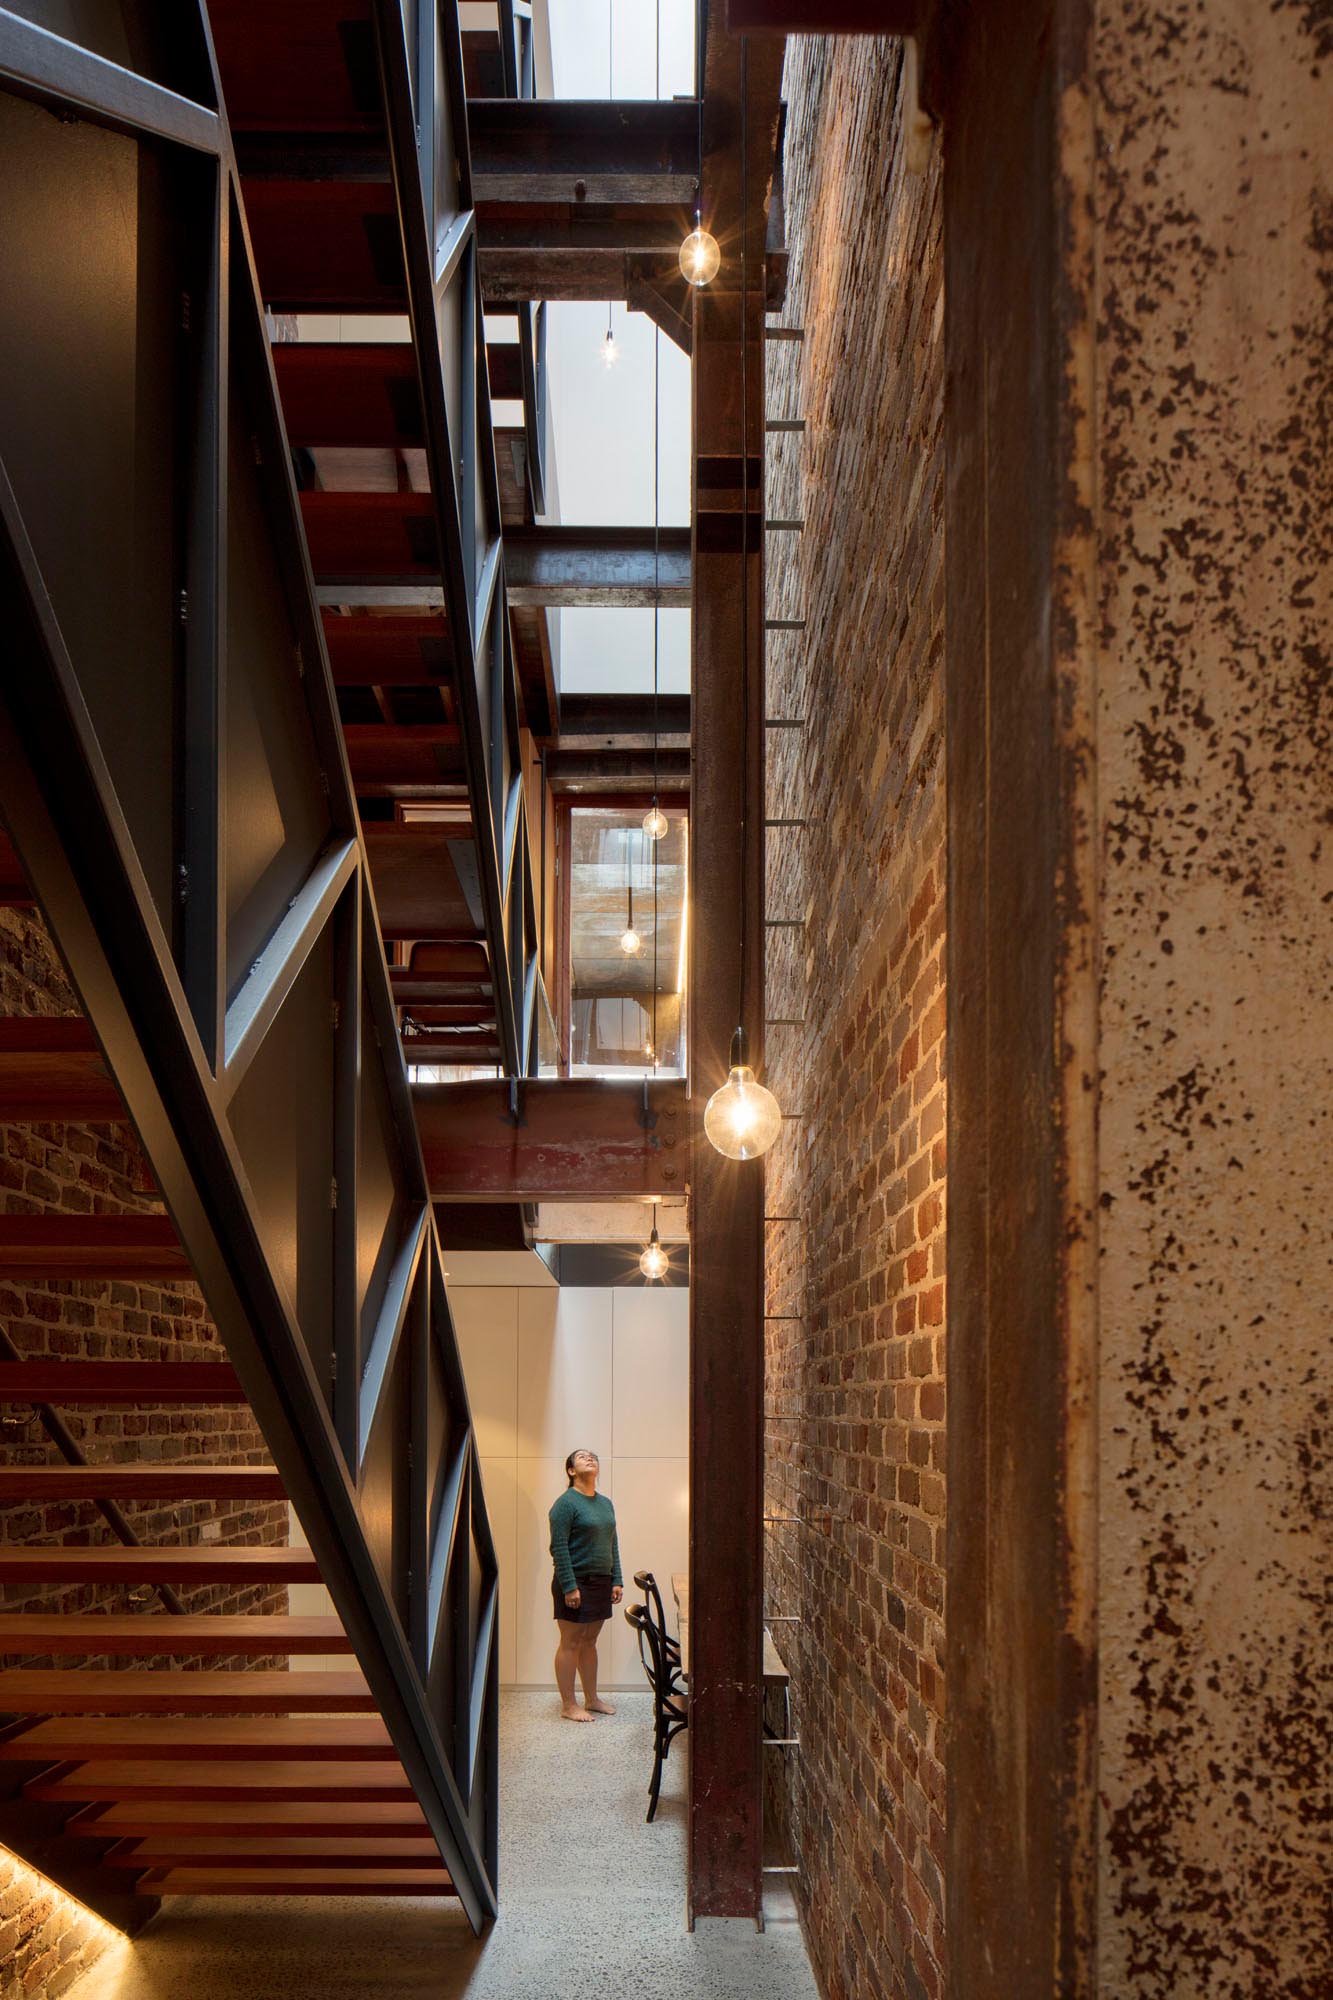 Stepping inside this home, and you're immediately greeted by a recycled three storey brick wall that follows the staircase up, and compliments the steel beam elements on display throughout the home.